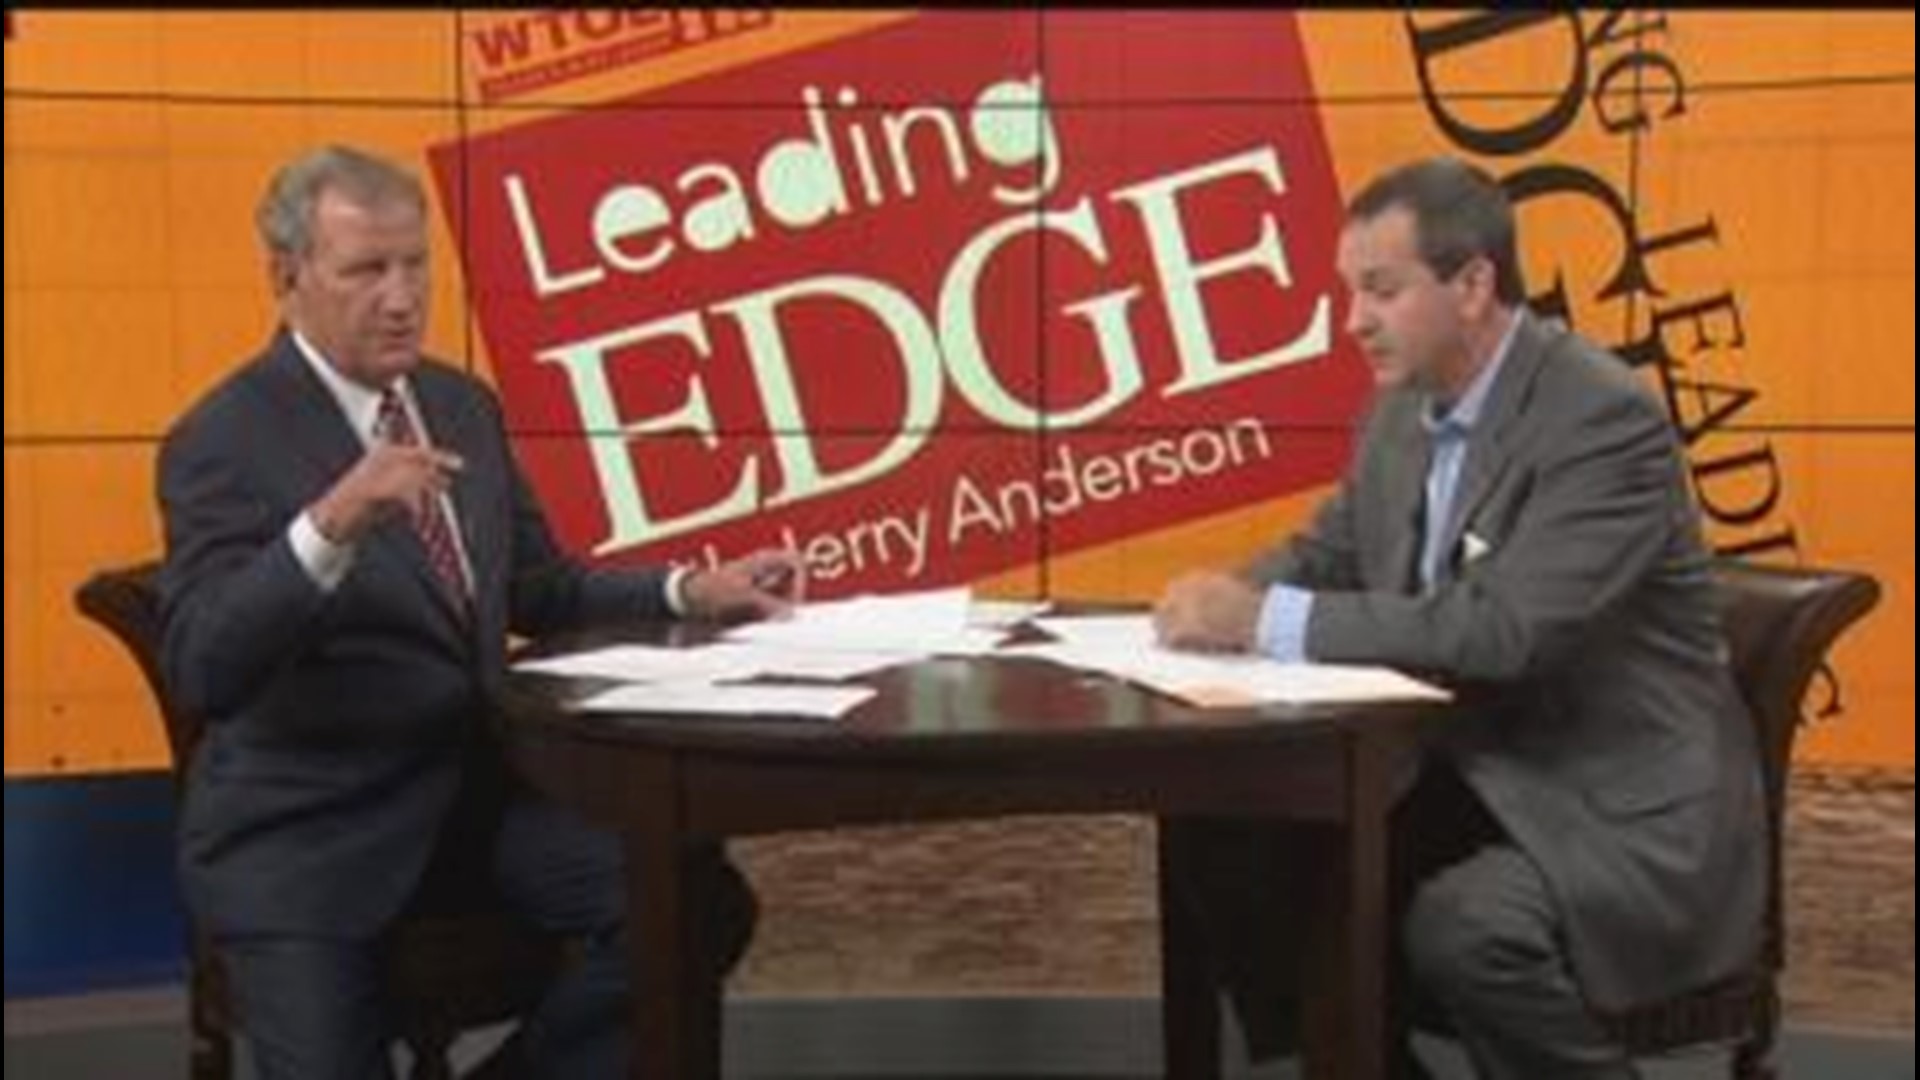 June 25: Leading Edge with Jerry Anderson - Part 2